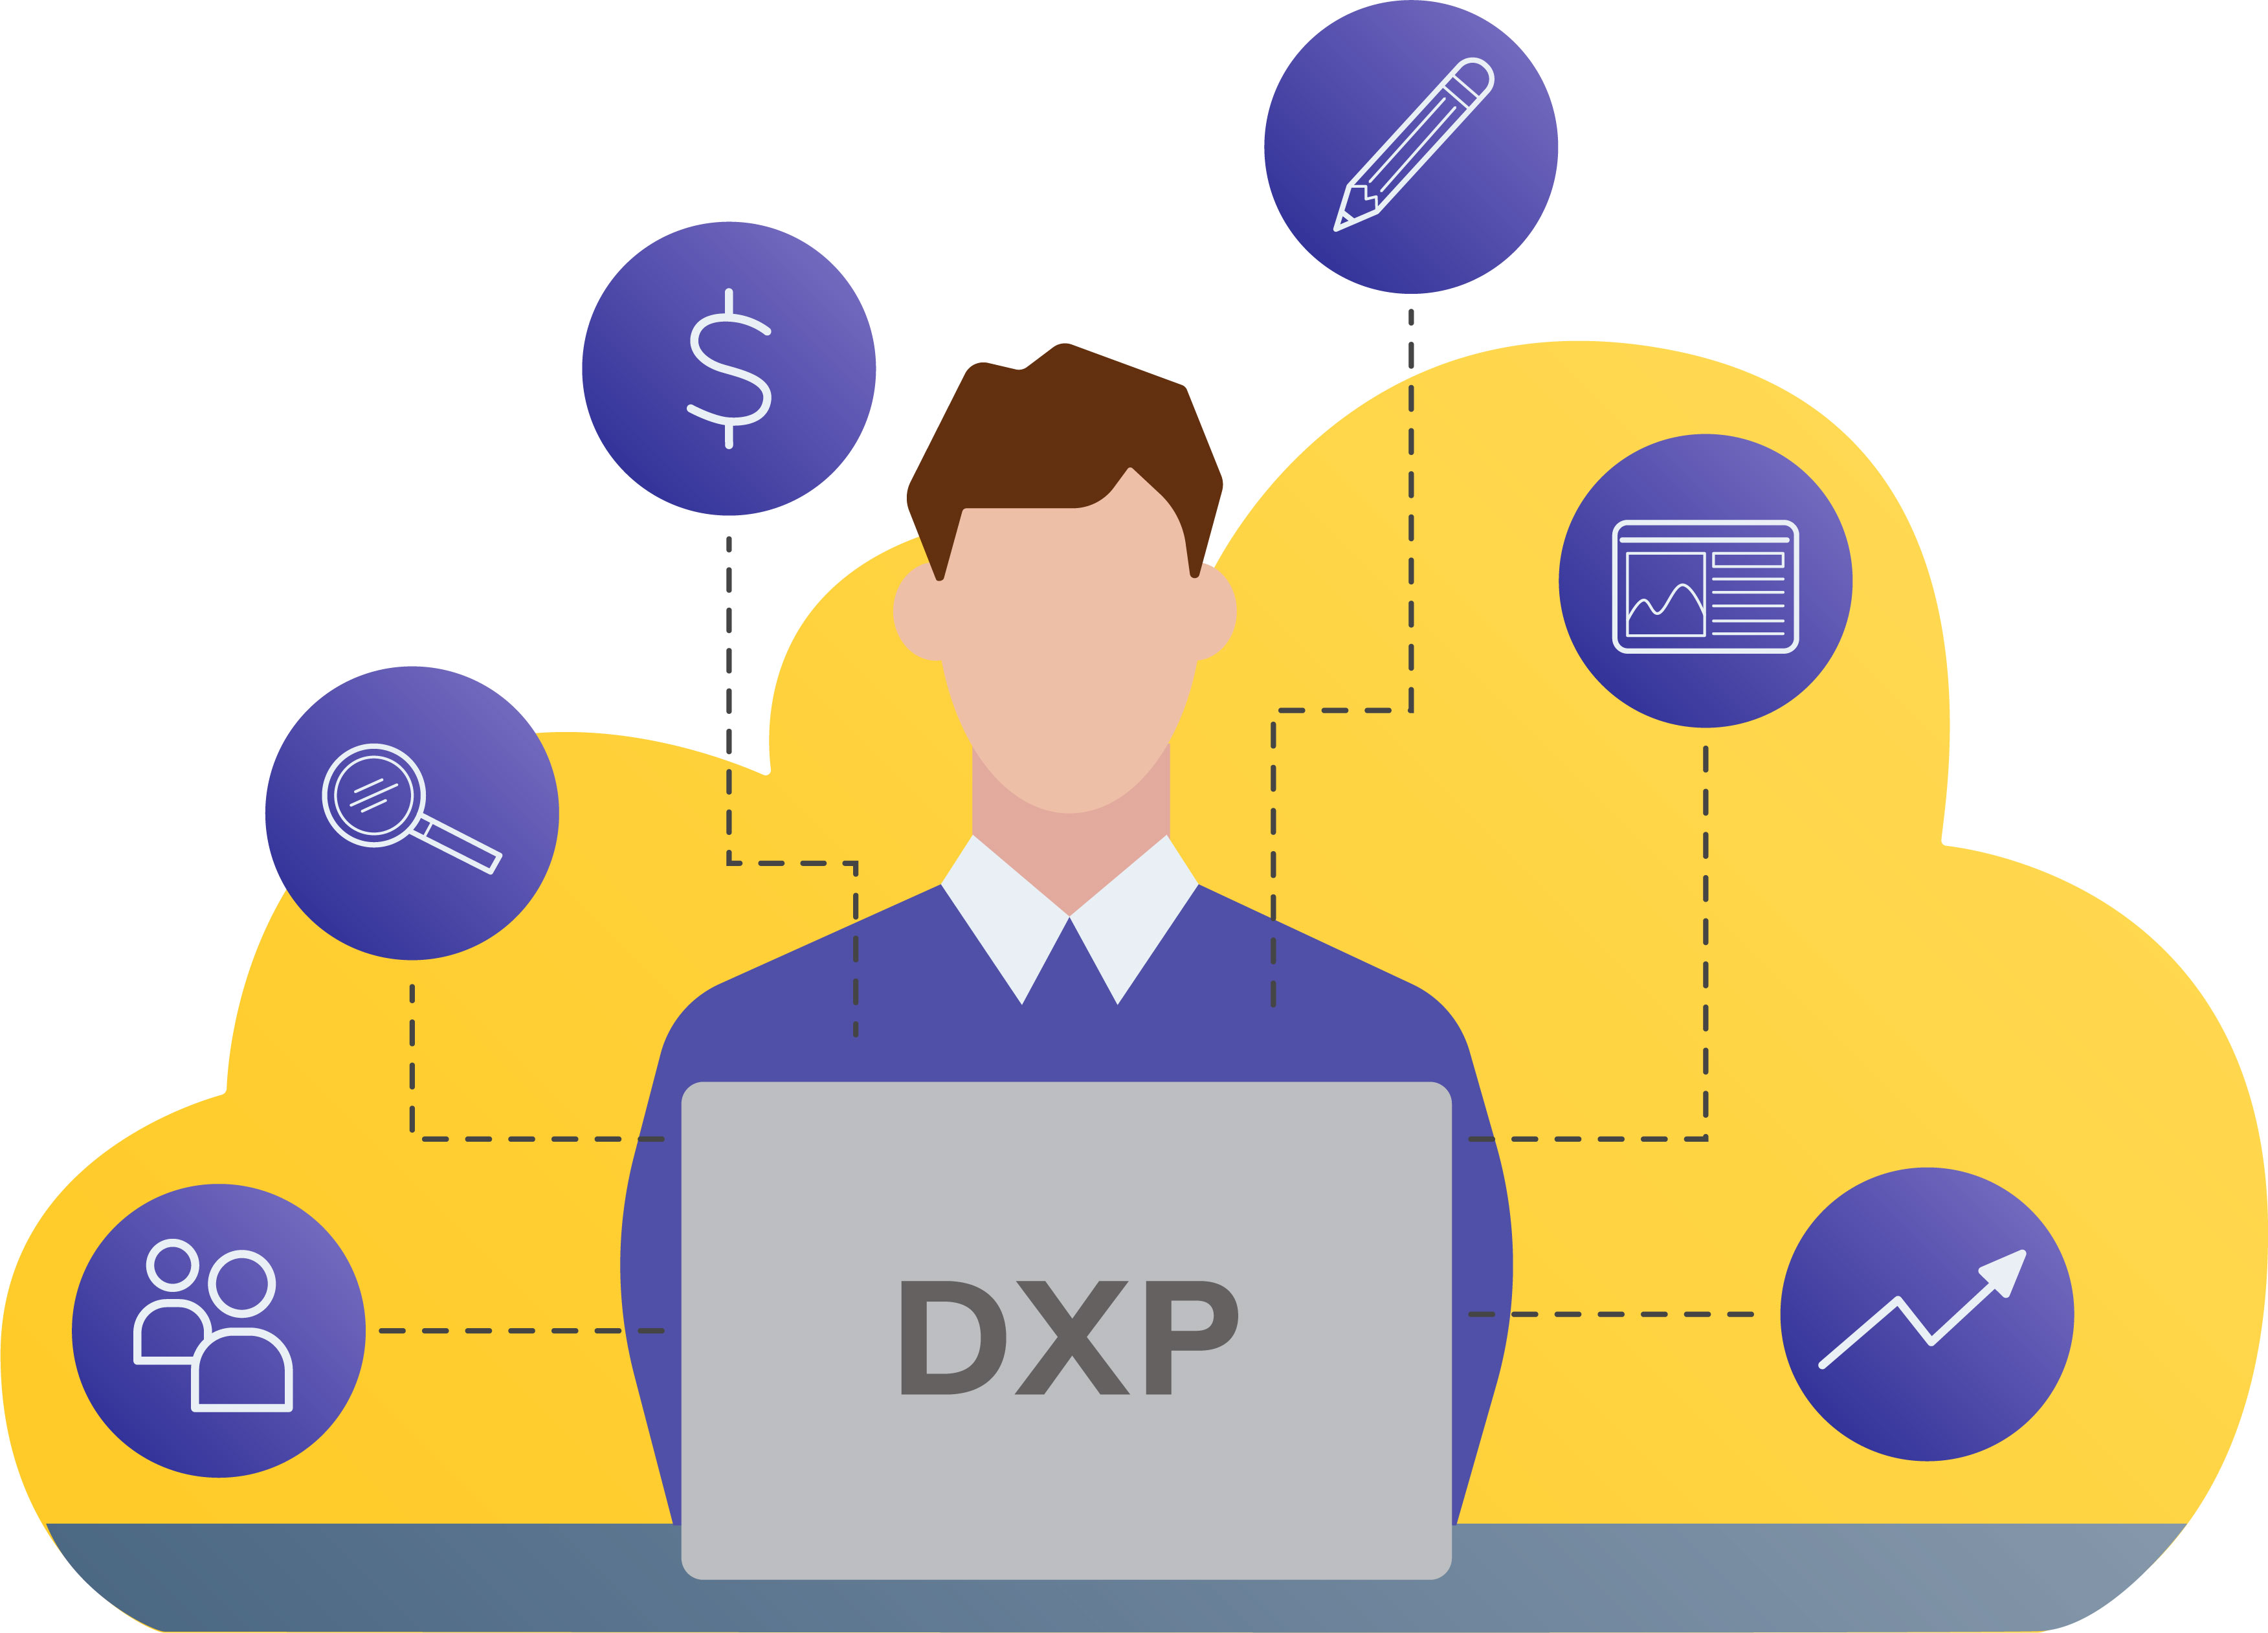 What is a modern DXP? On agilitycms.com